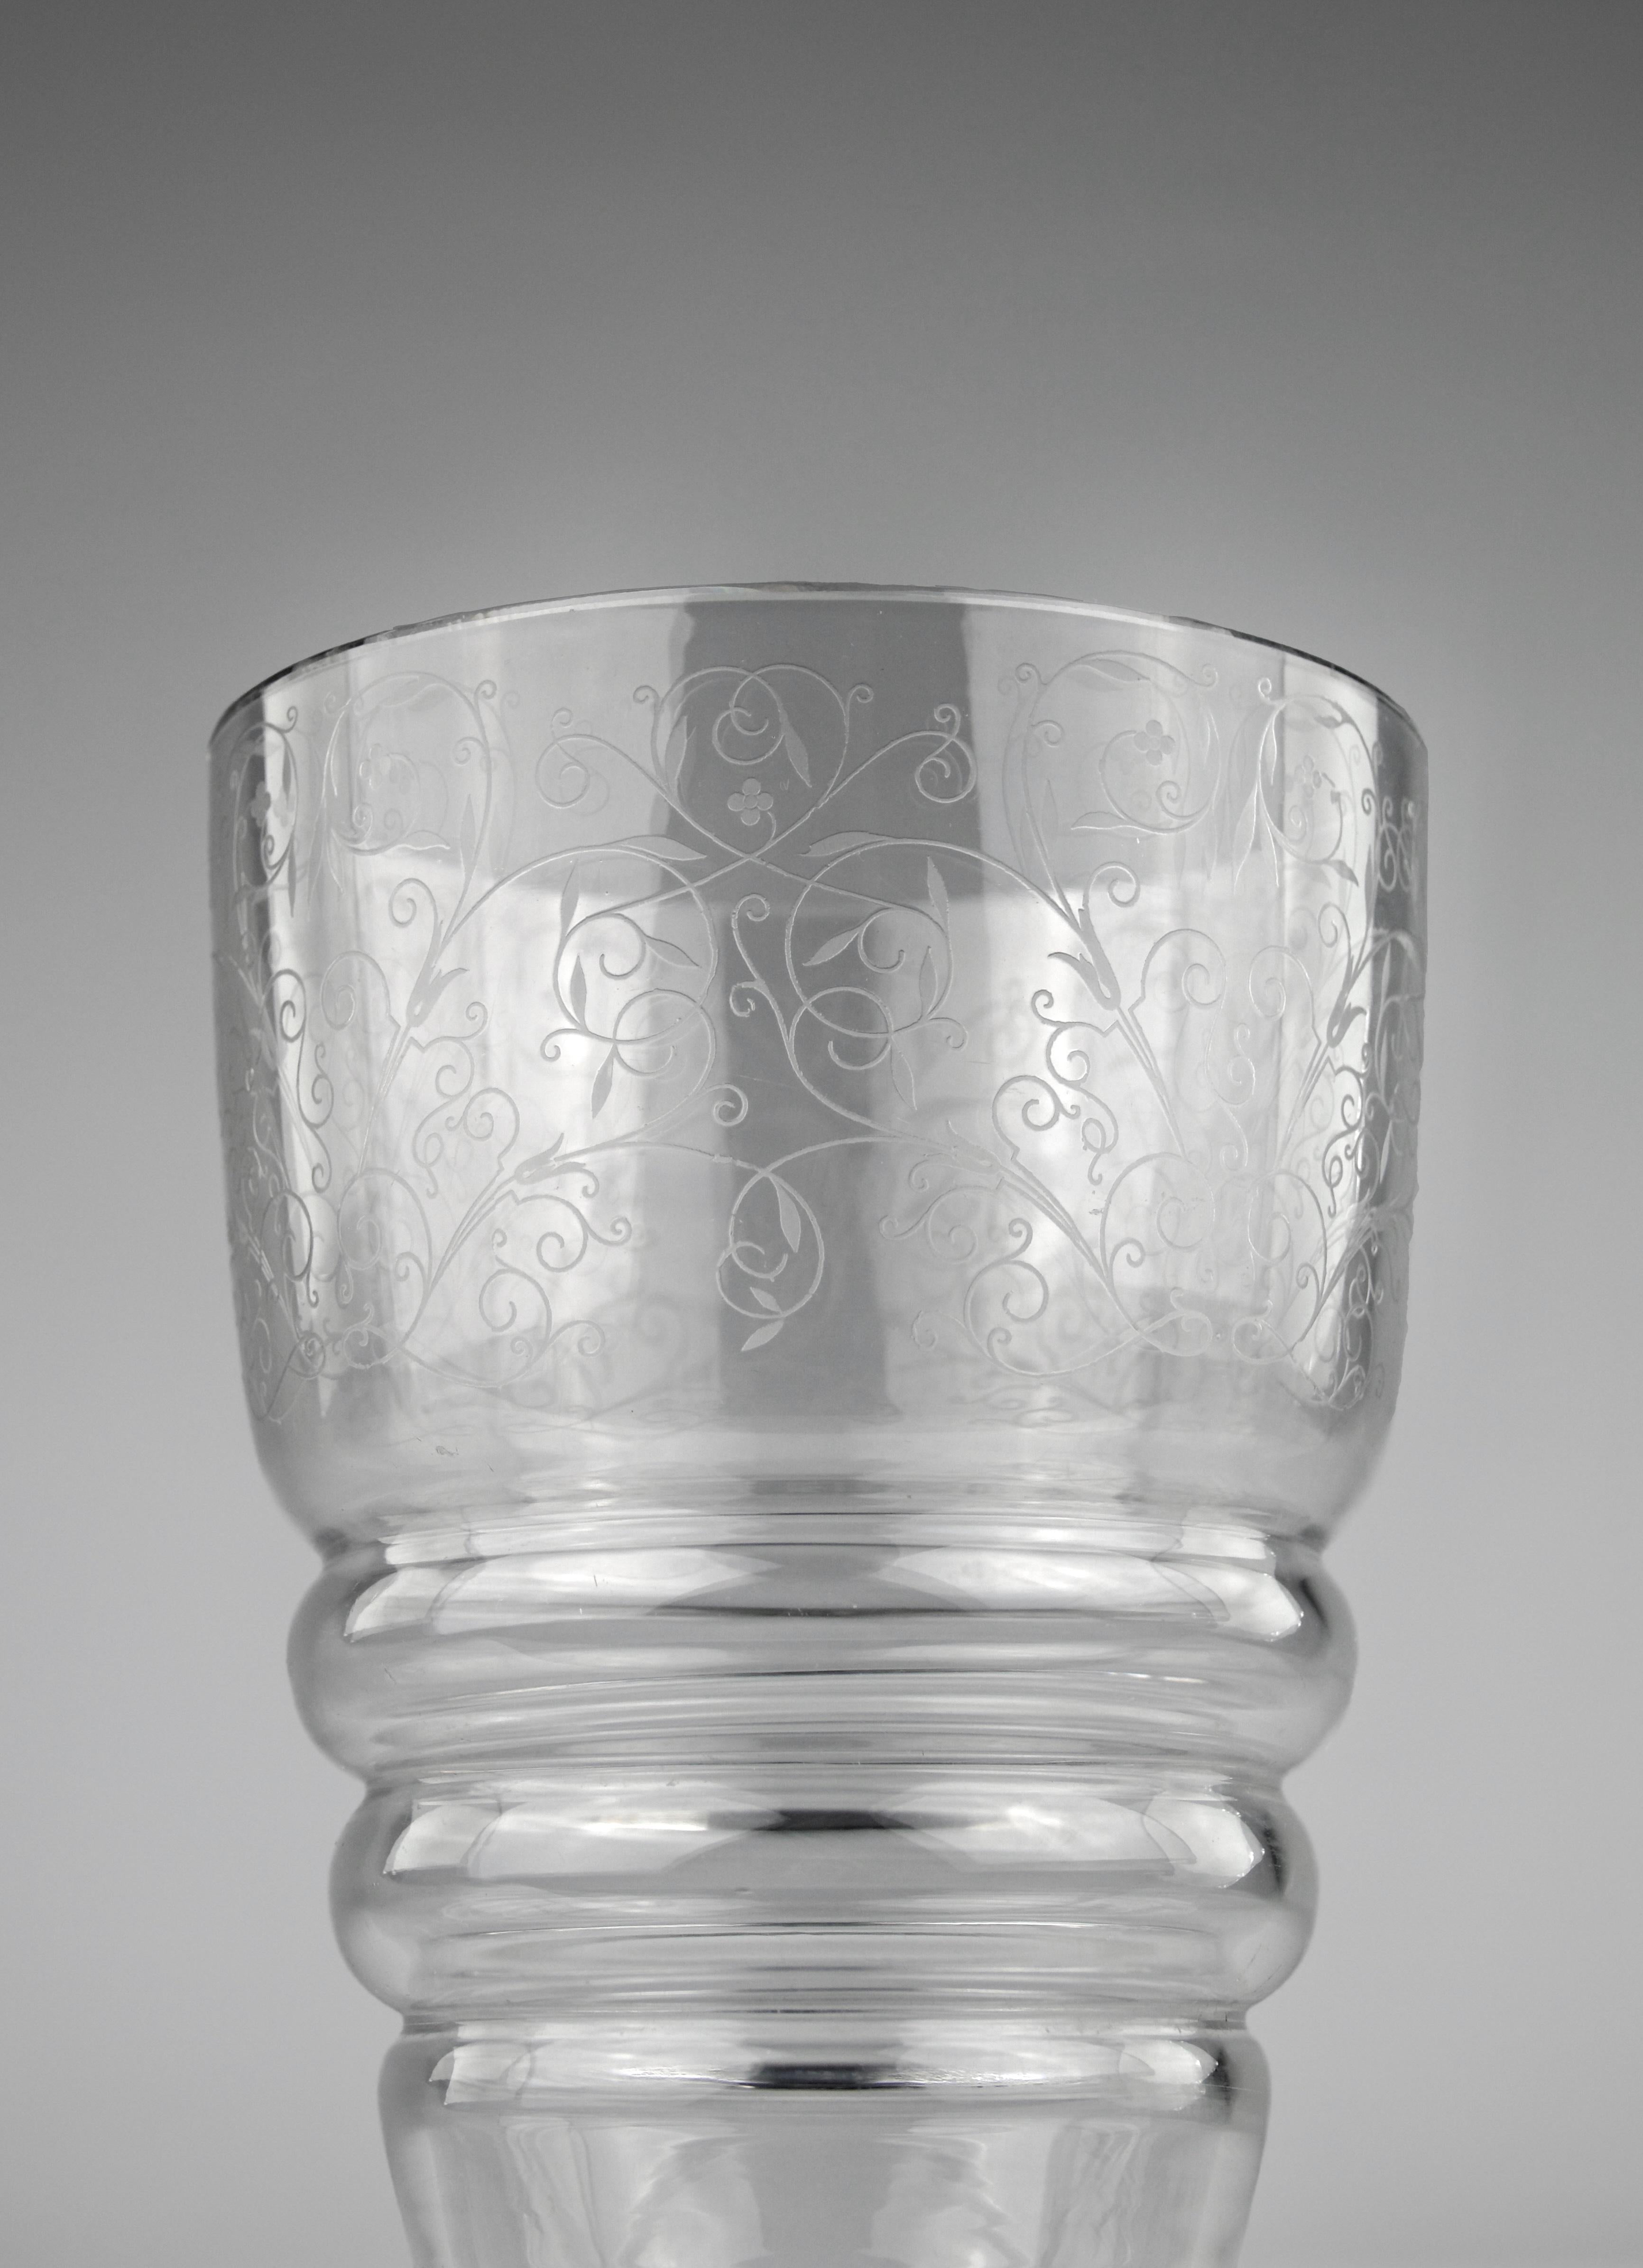 Superb 1940s Baccarat crystal vase with gracefully engraved decorations of foliage. 

In very good condition. Slight signs of use.

Dimensions in cm ( H x D ) : 19.5 x 15.4

Secure shipping.

Since 1764 Baccarat has written the chapters of